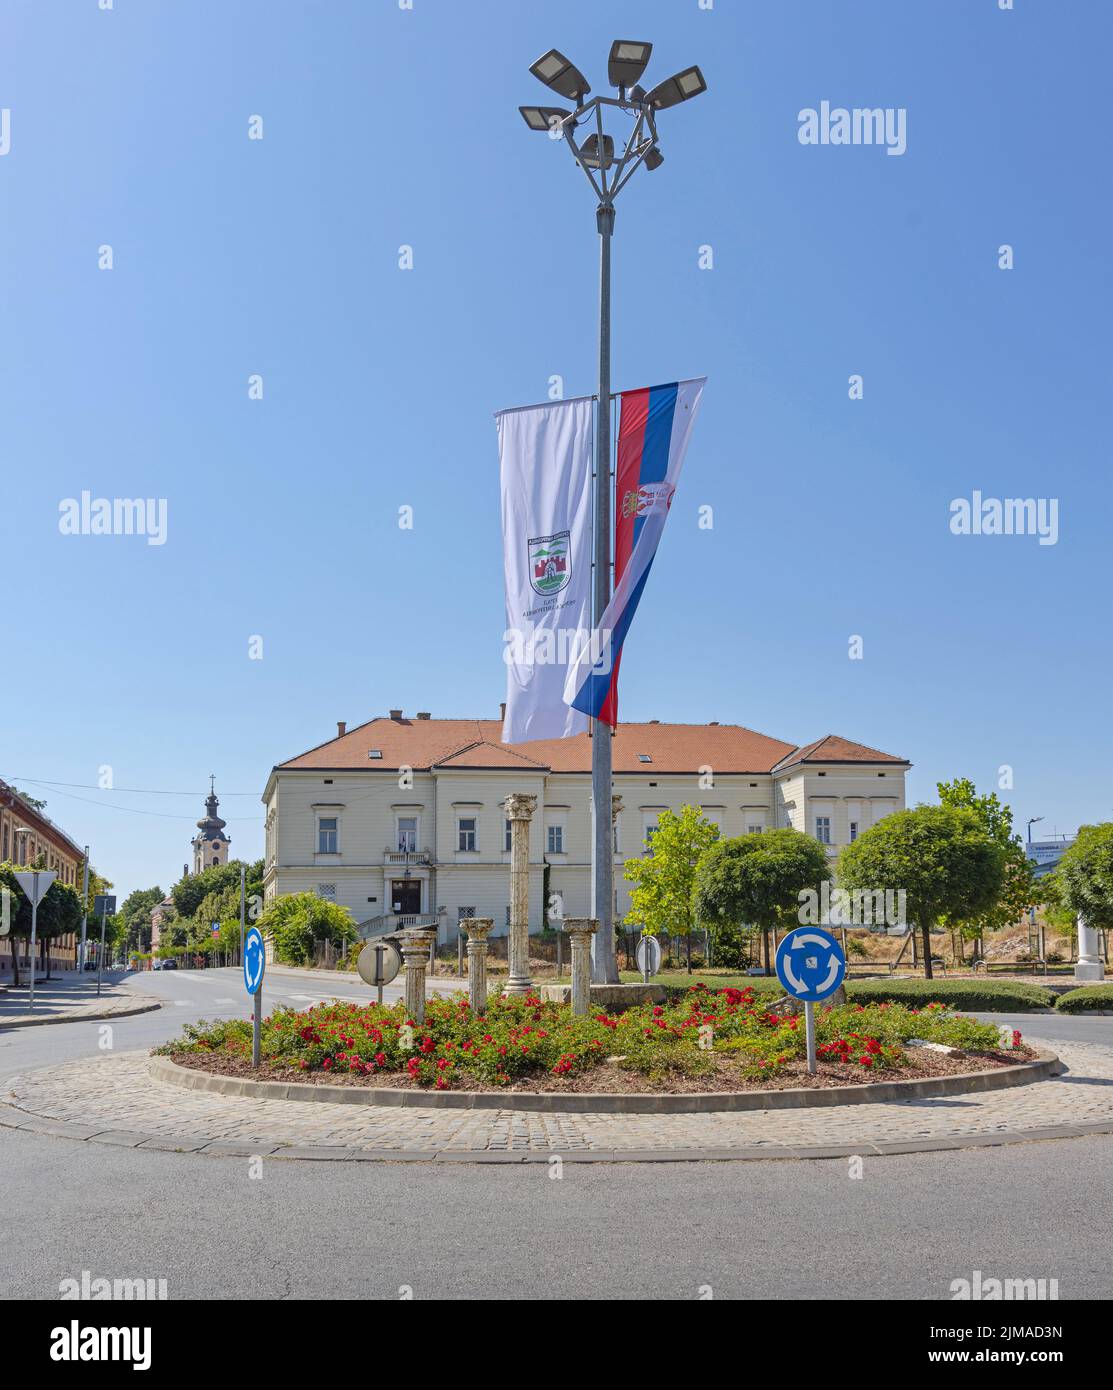 Sremska Mitrovica, Serbia - July 22, 2022: Museum of Srem Building and Roman Columns Artifacts at Roundabout Intersection in City. Stock Photo